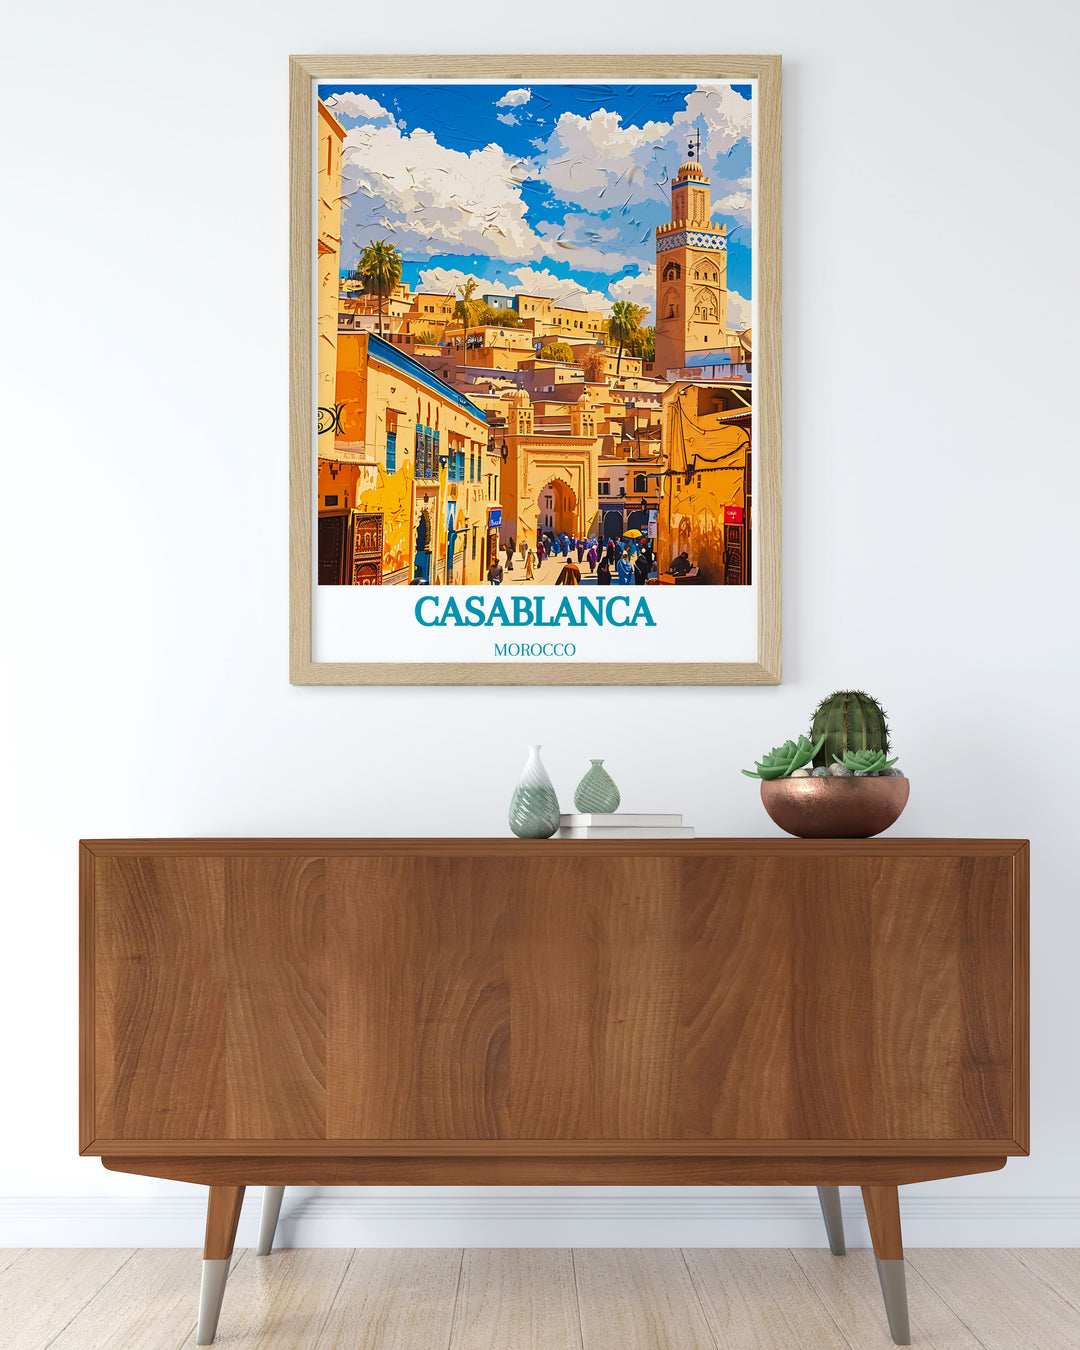 Highlighting the iconic presence of Old Medina and the vibrant culture of Casablanca, this travel poster is perfect for those who appreciate the historical and cultural richness of Morocco.